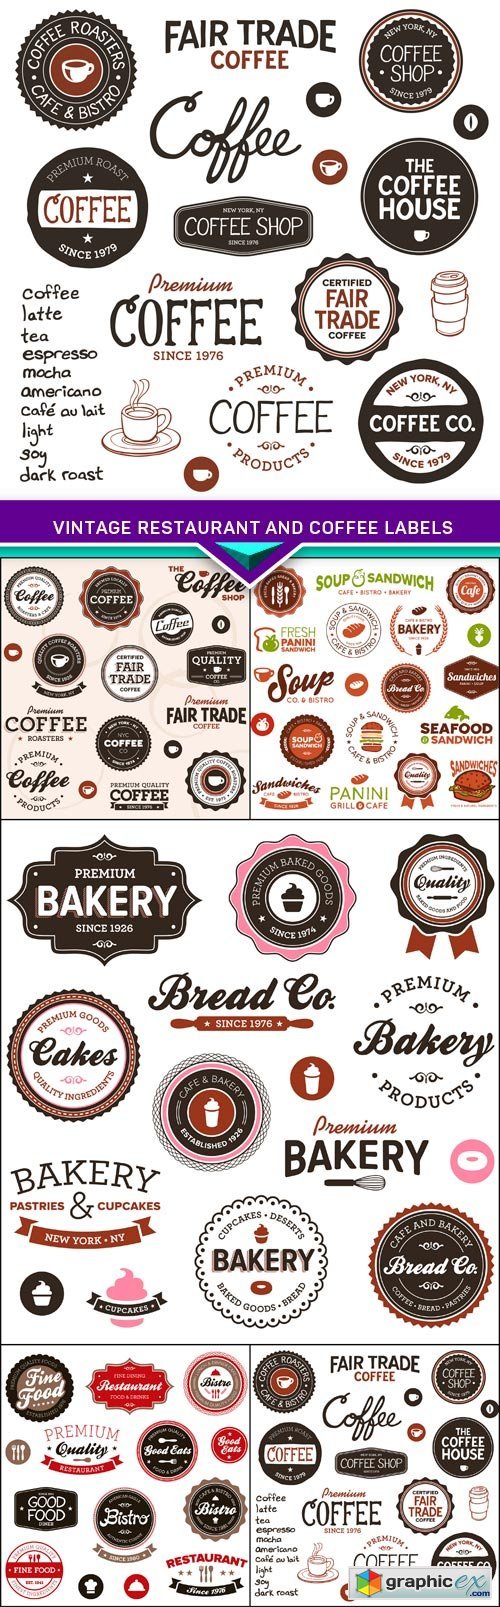 Vintage restaurant and coffee labels 5X EPS